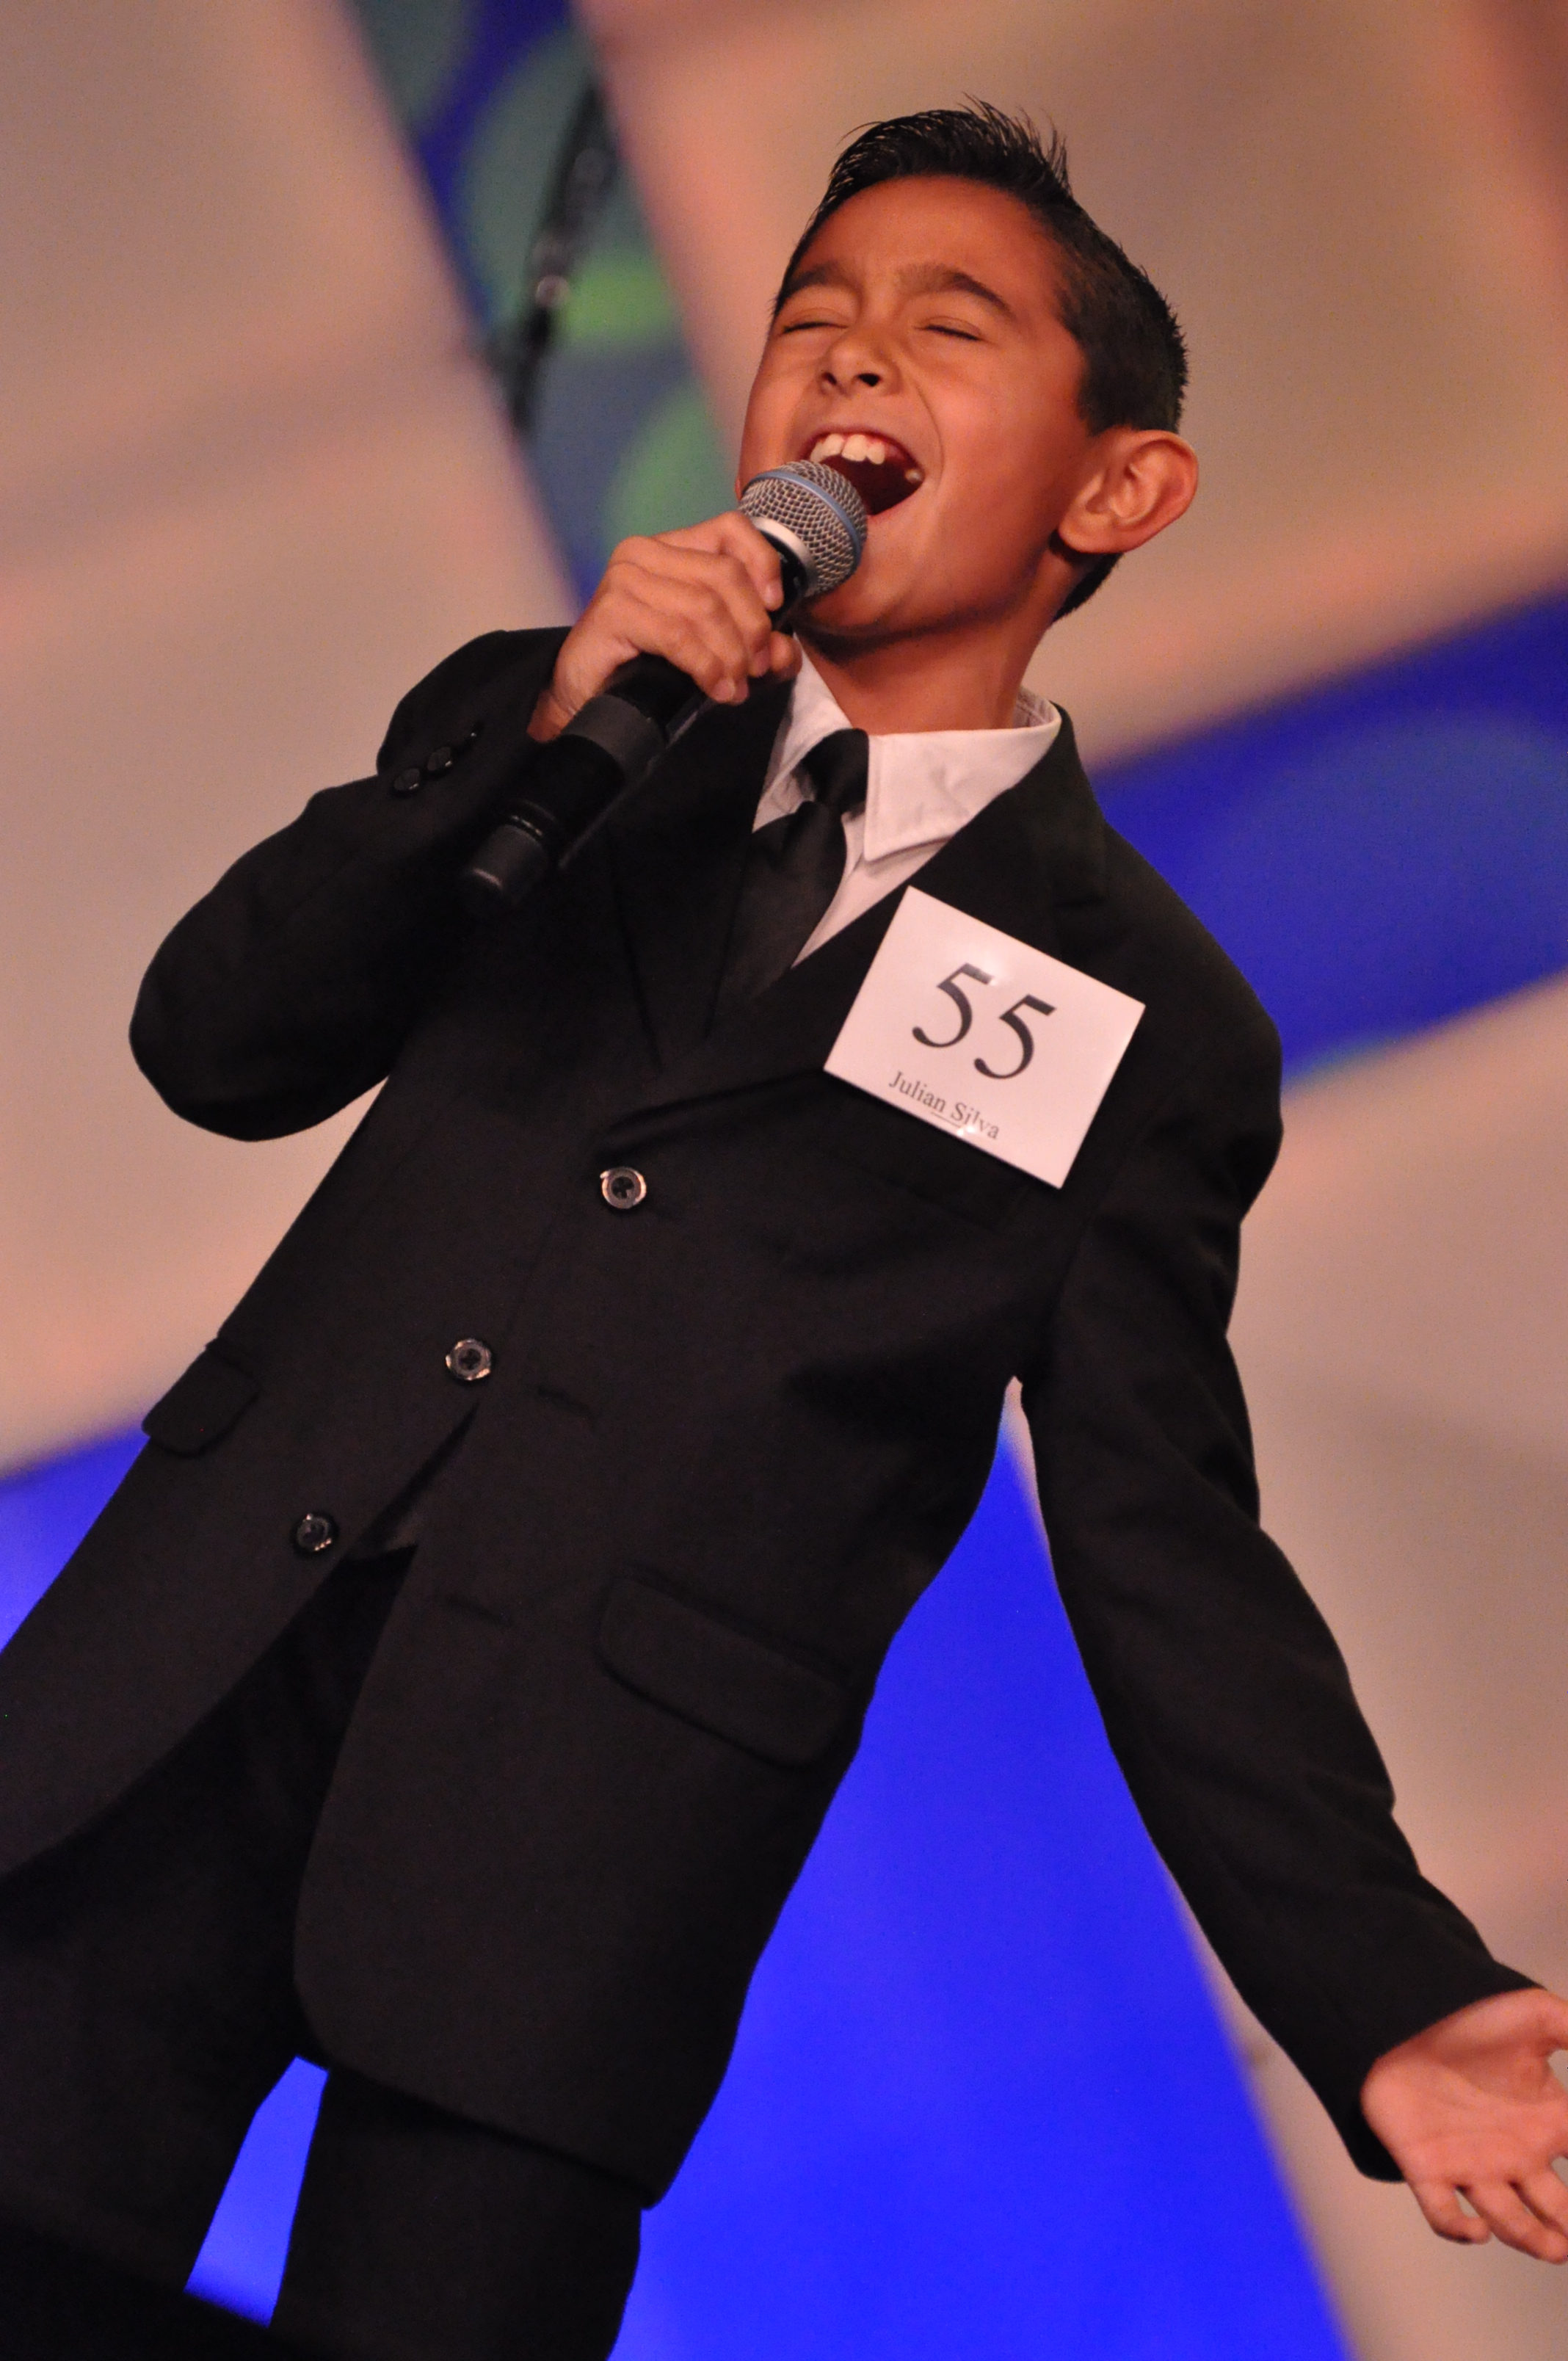 Julian Silva Belts out 'The Circle of Life' at AMTC's 2013 WInter Shine Convention